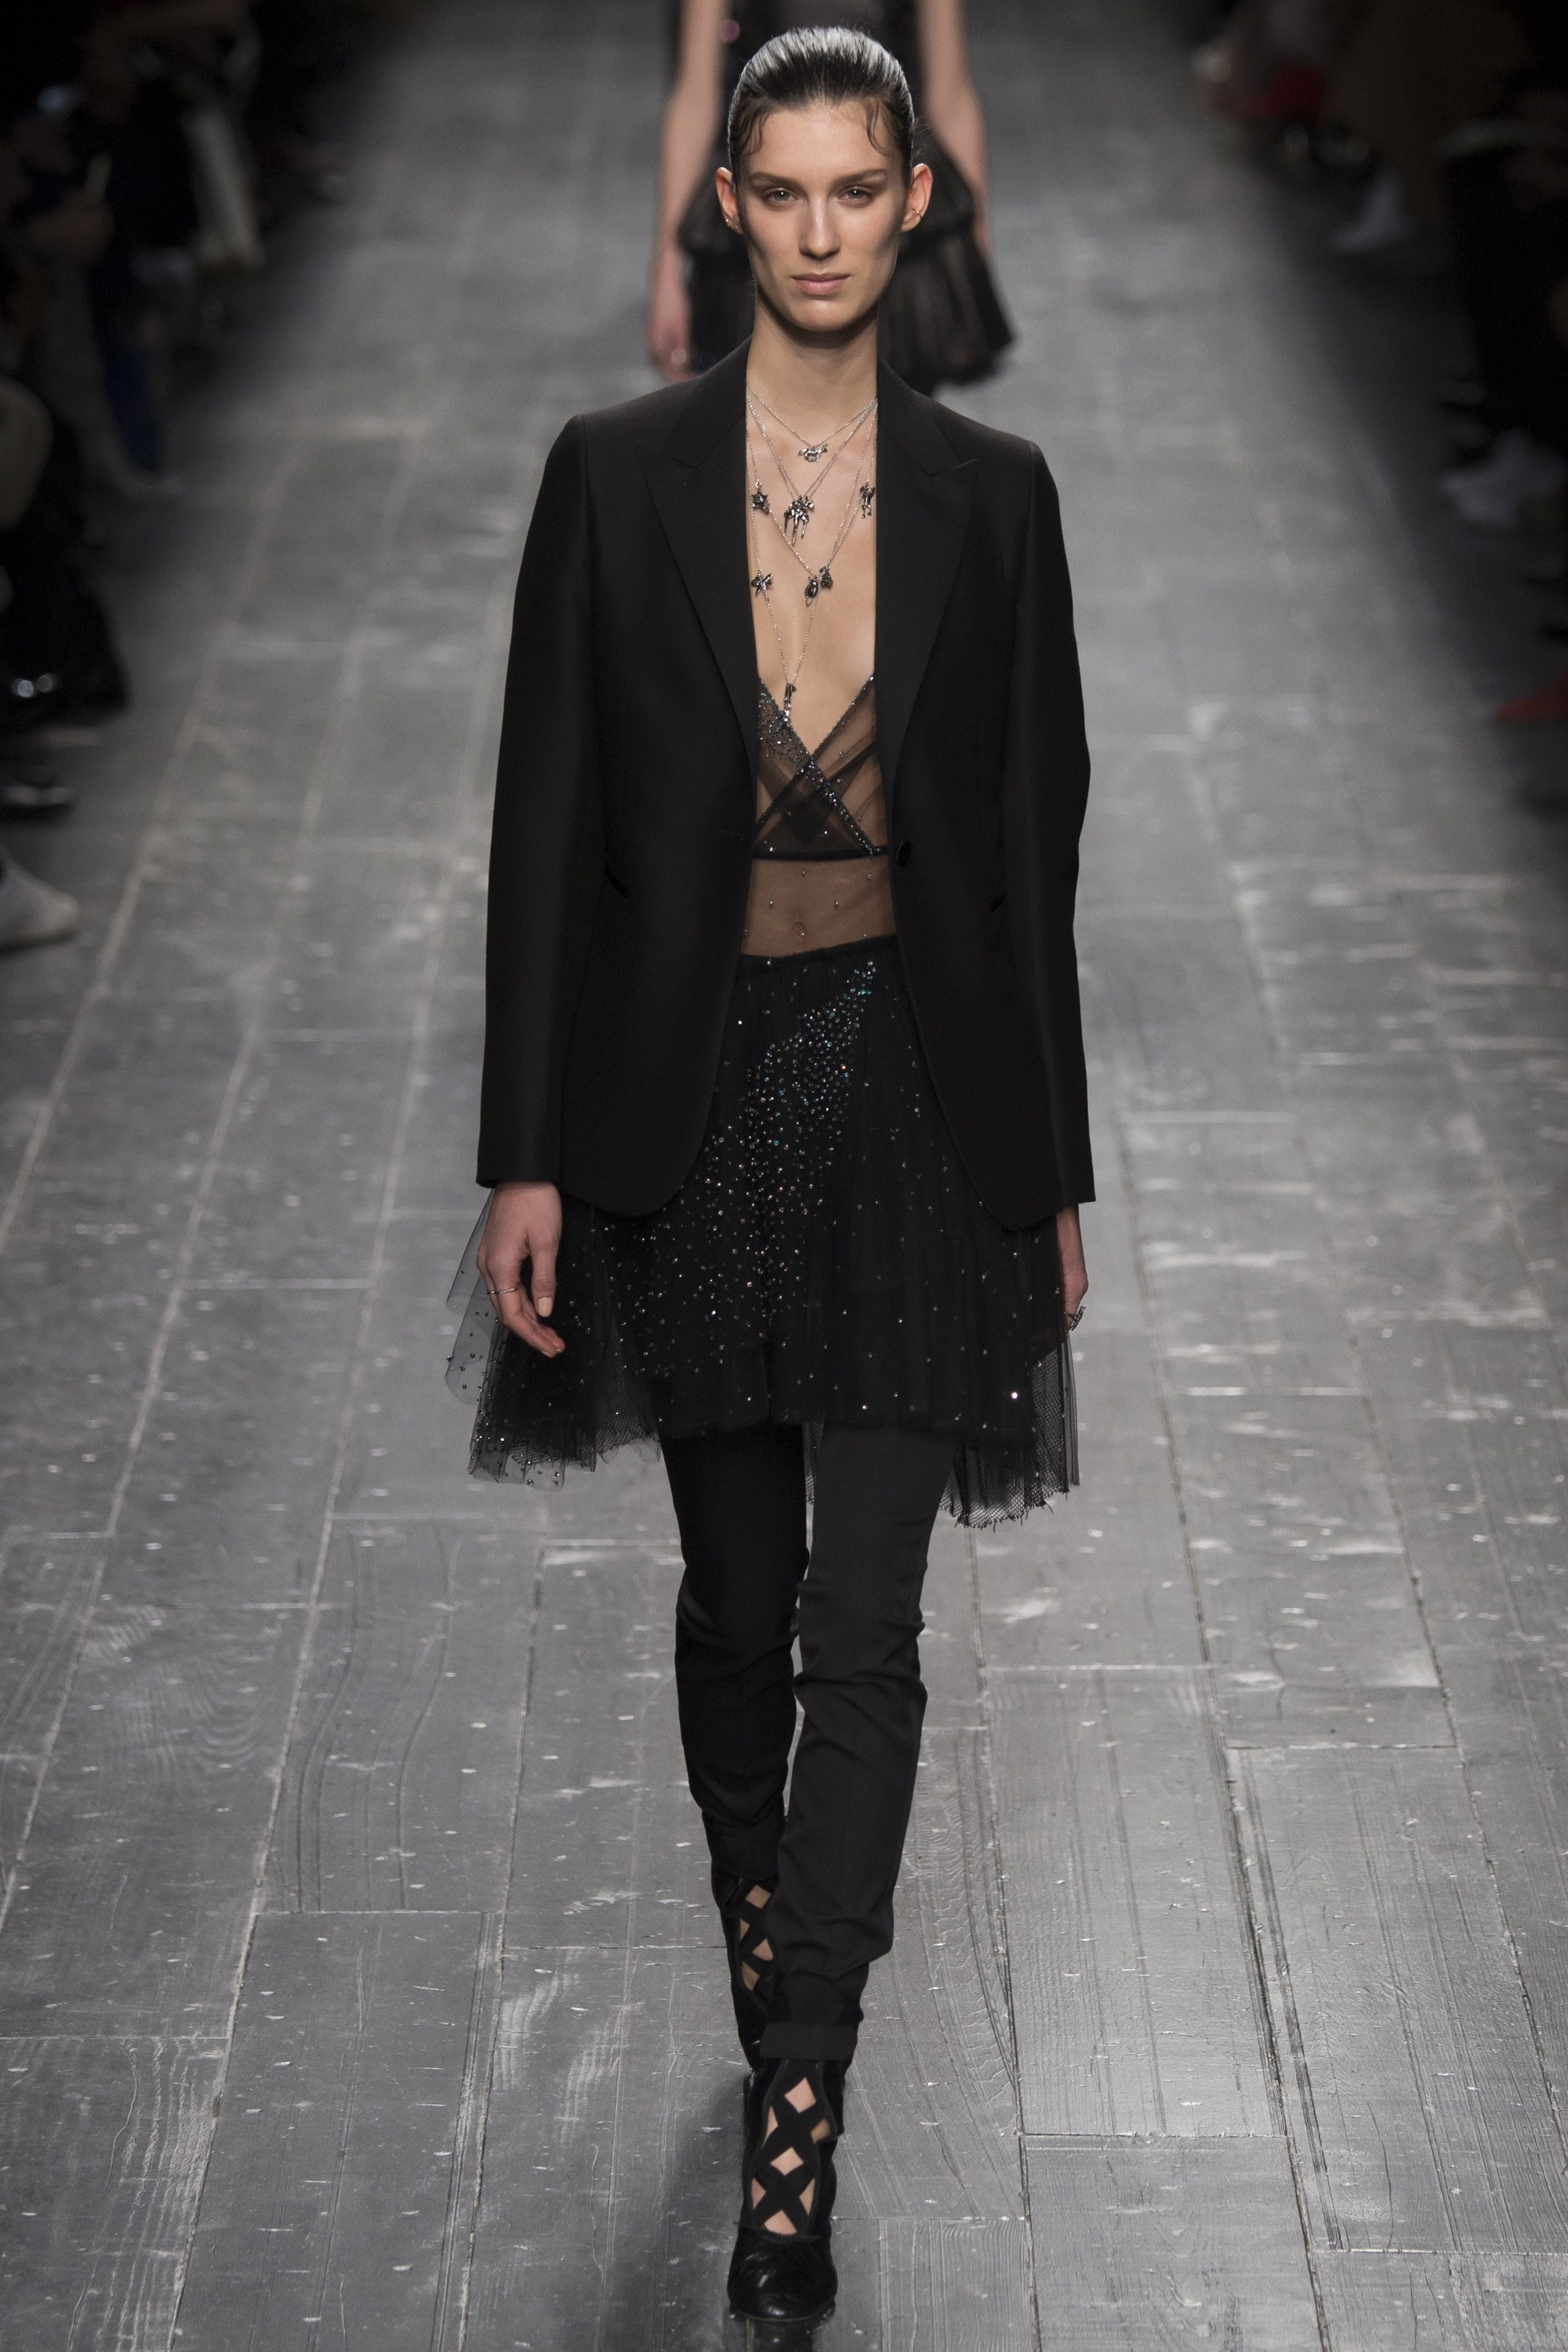 Valentino Fall 2016 RTW inspired by Ballet and Dance - Red carpet and ...